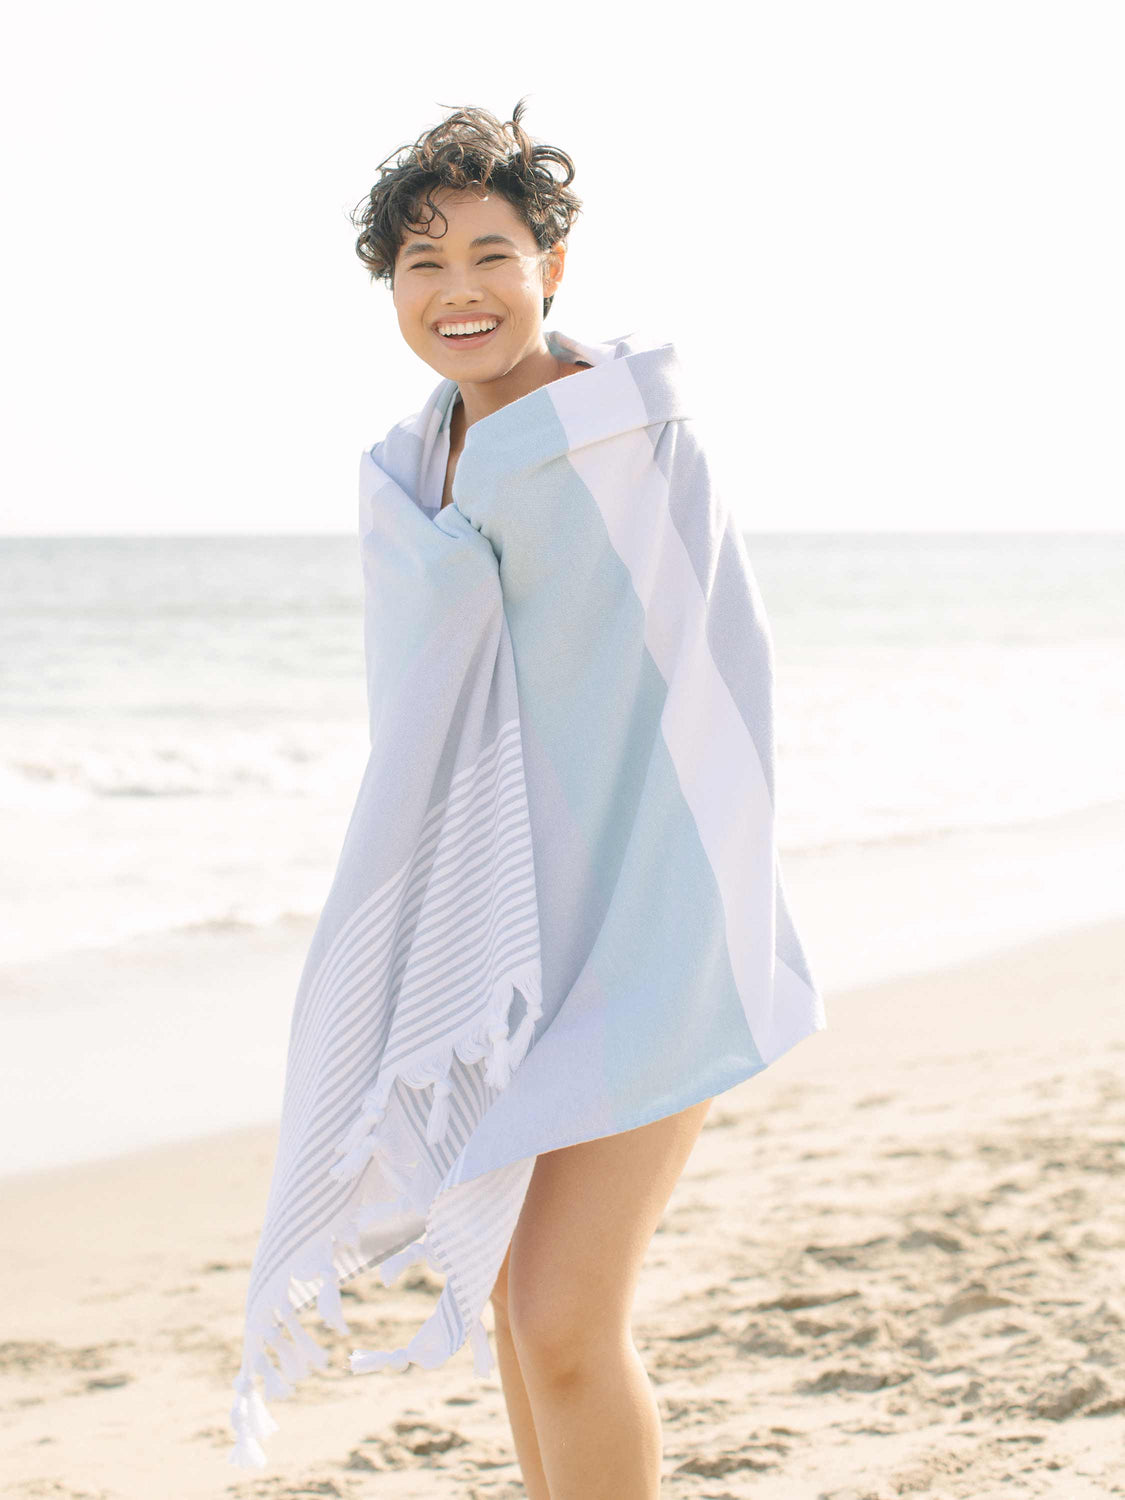 A woman wrapped in a teal and grey oversized Turkish towel smiling on the beach.